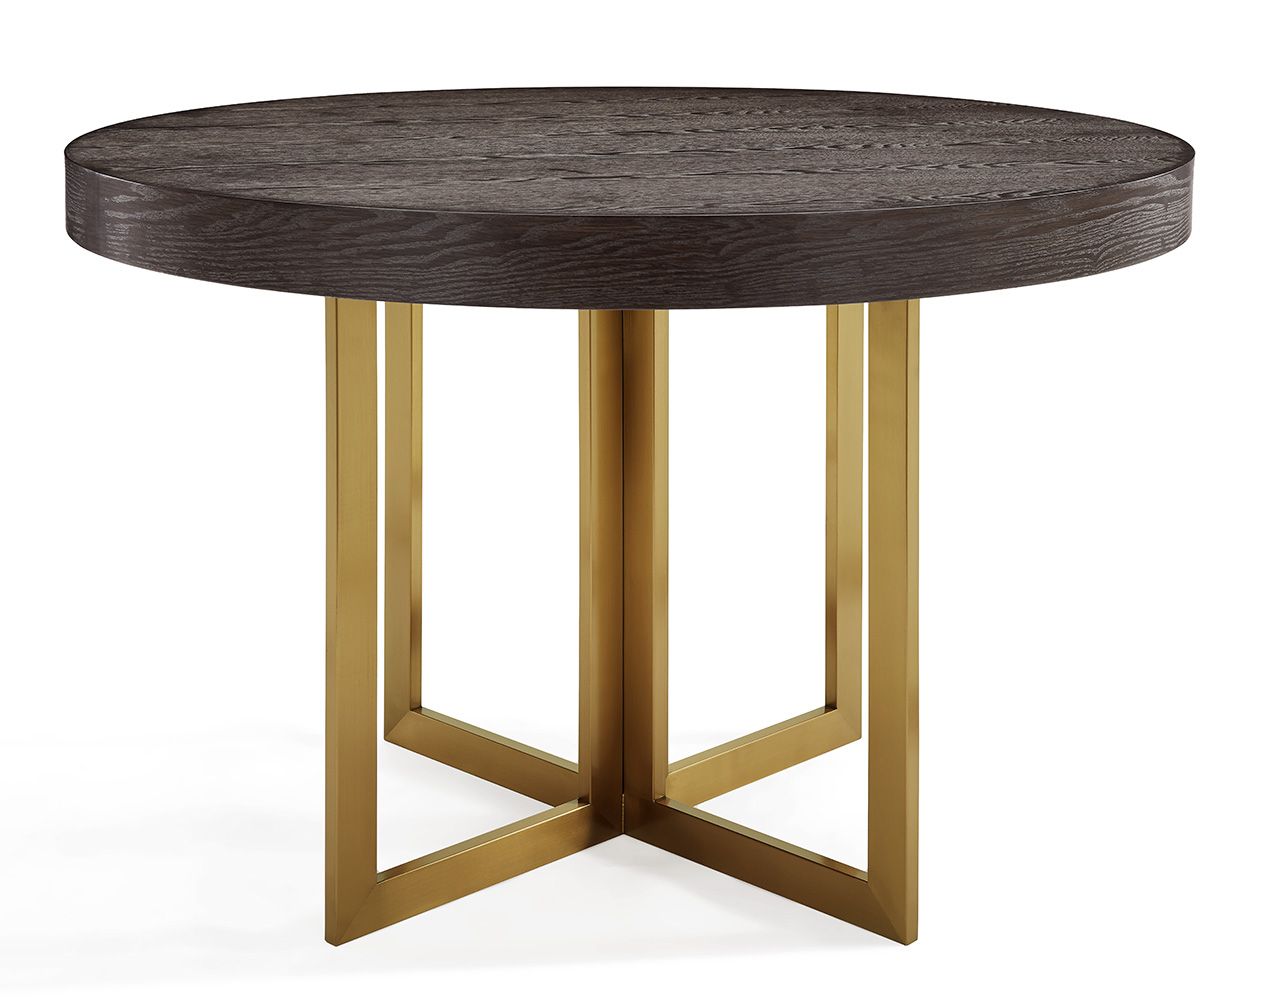 Sanremo Round Dining Table